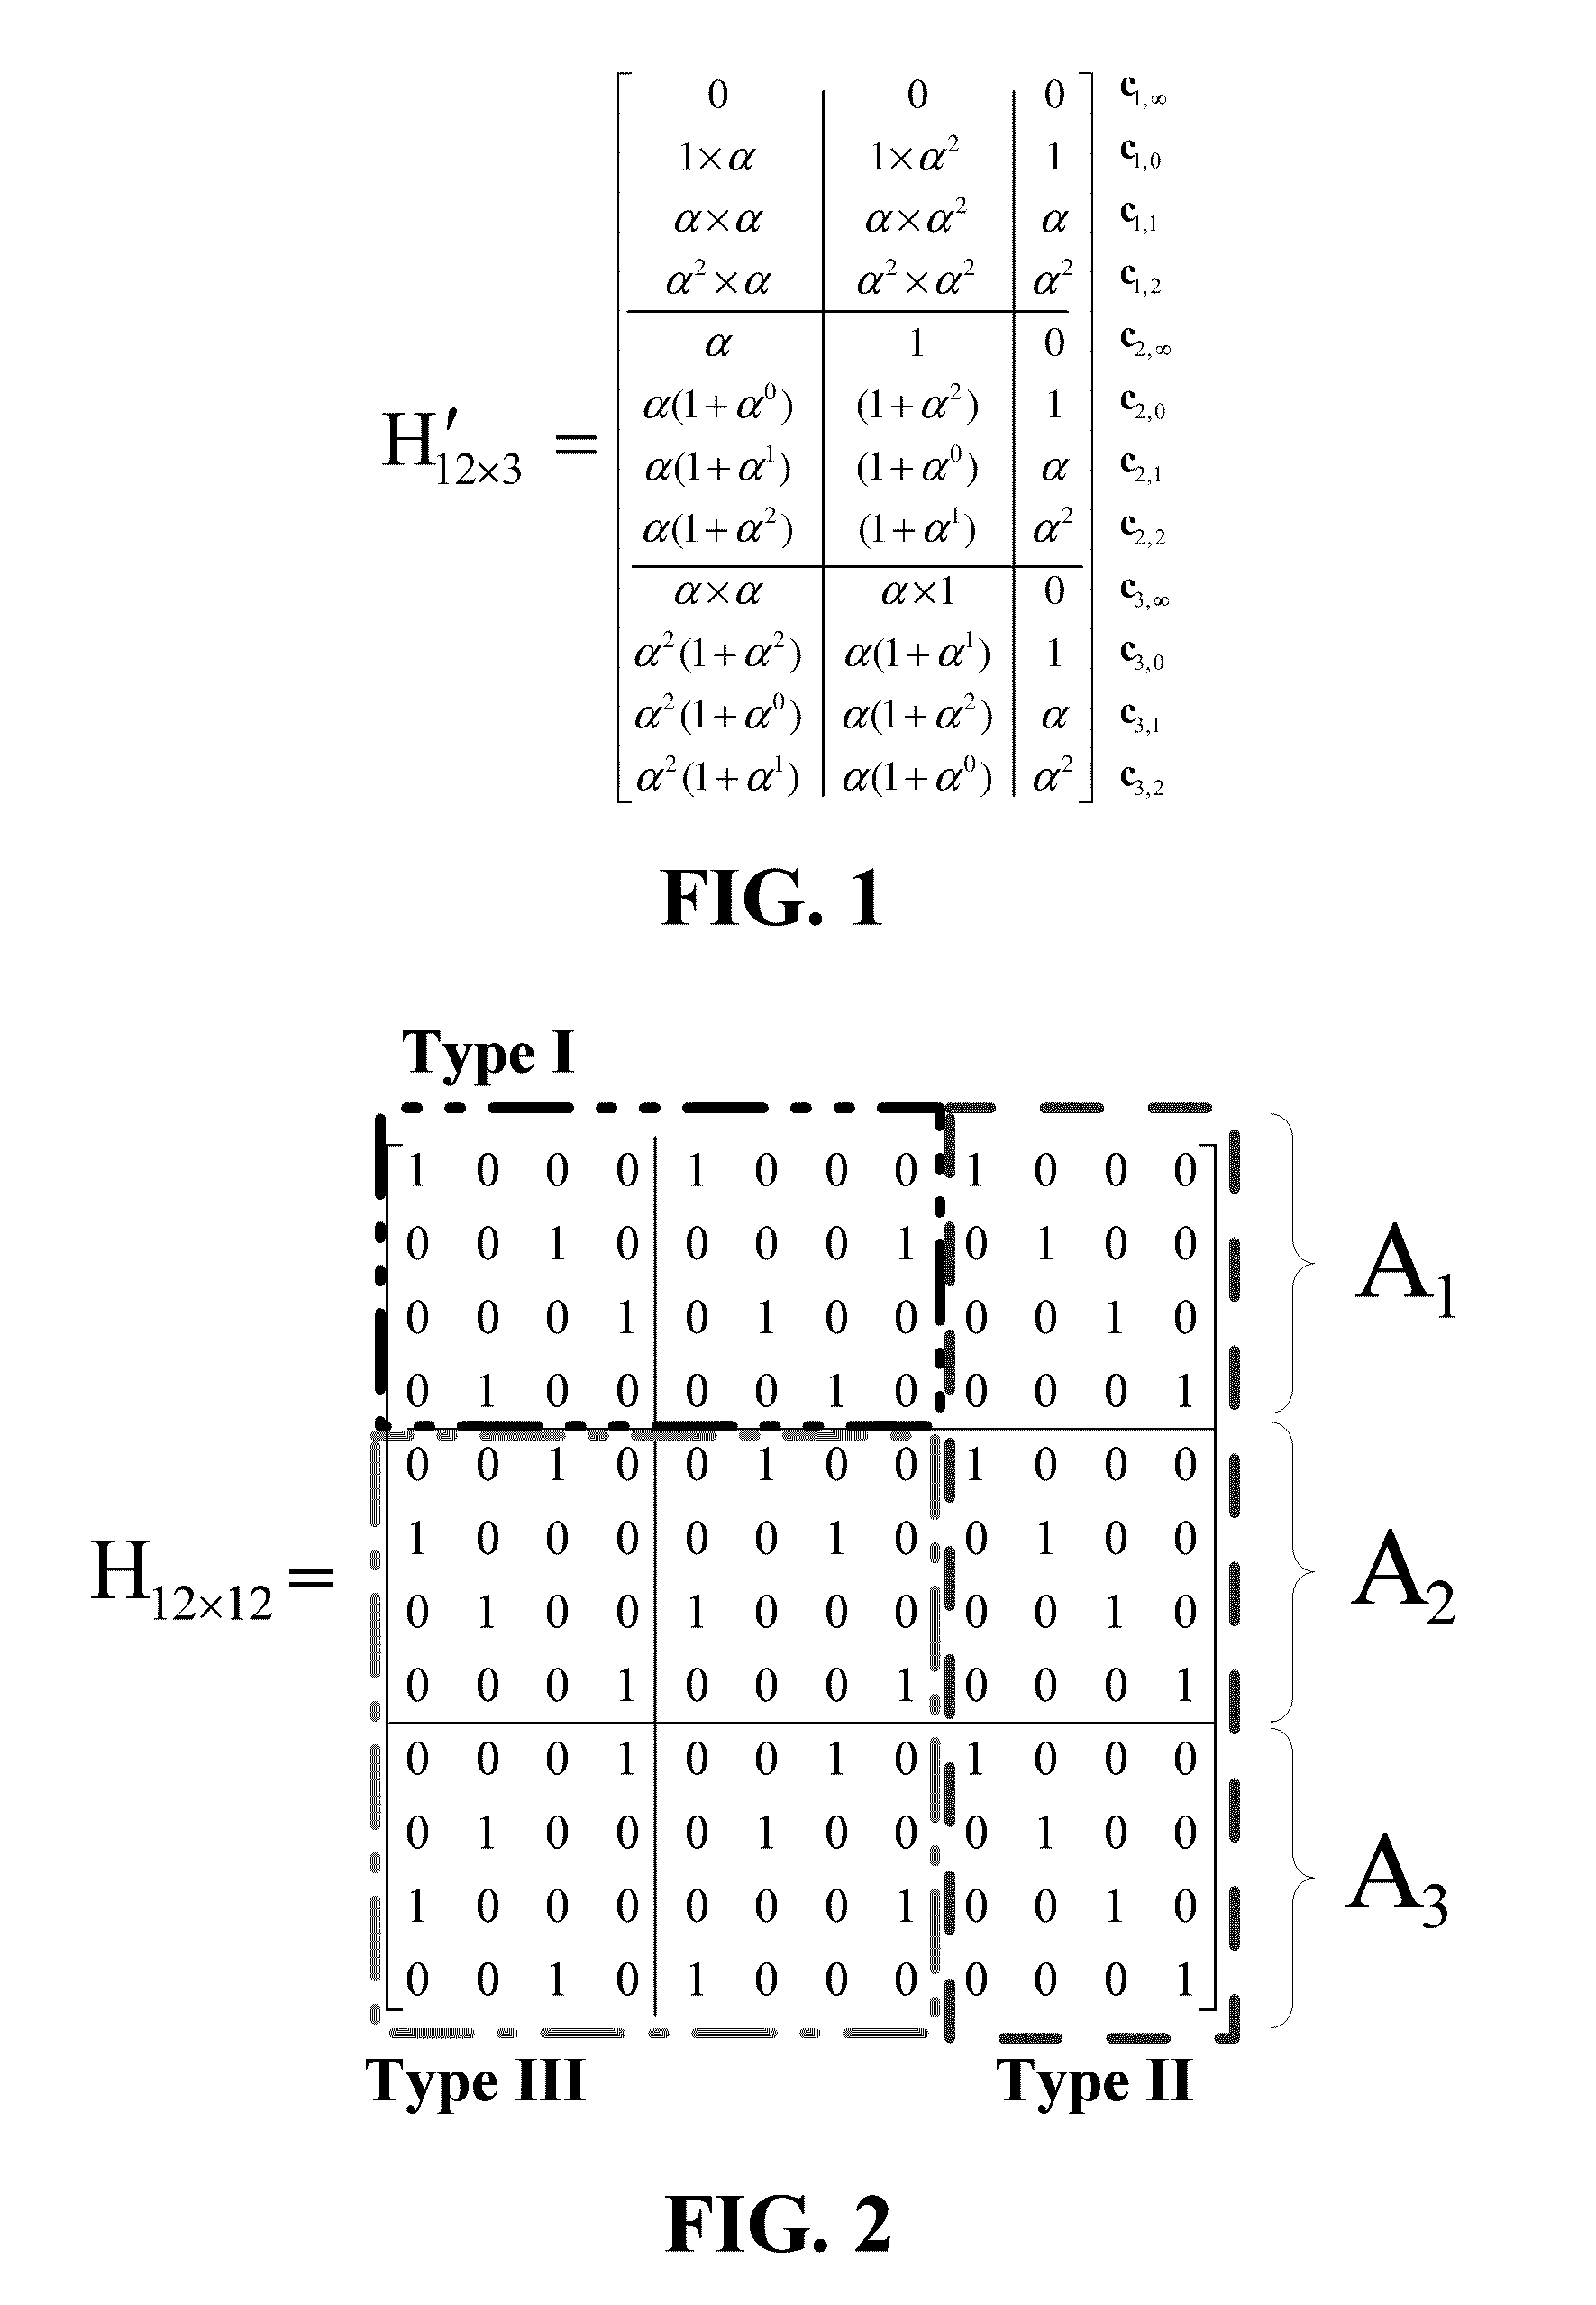 Decoder and decoding method for low-density parity check codes constructed based on reed-solomon codes